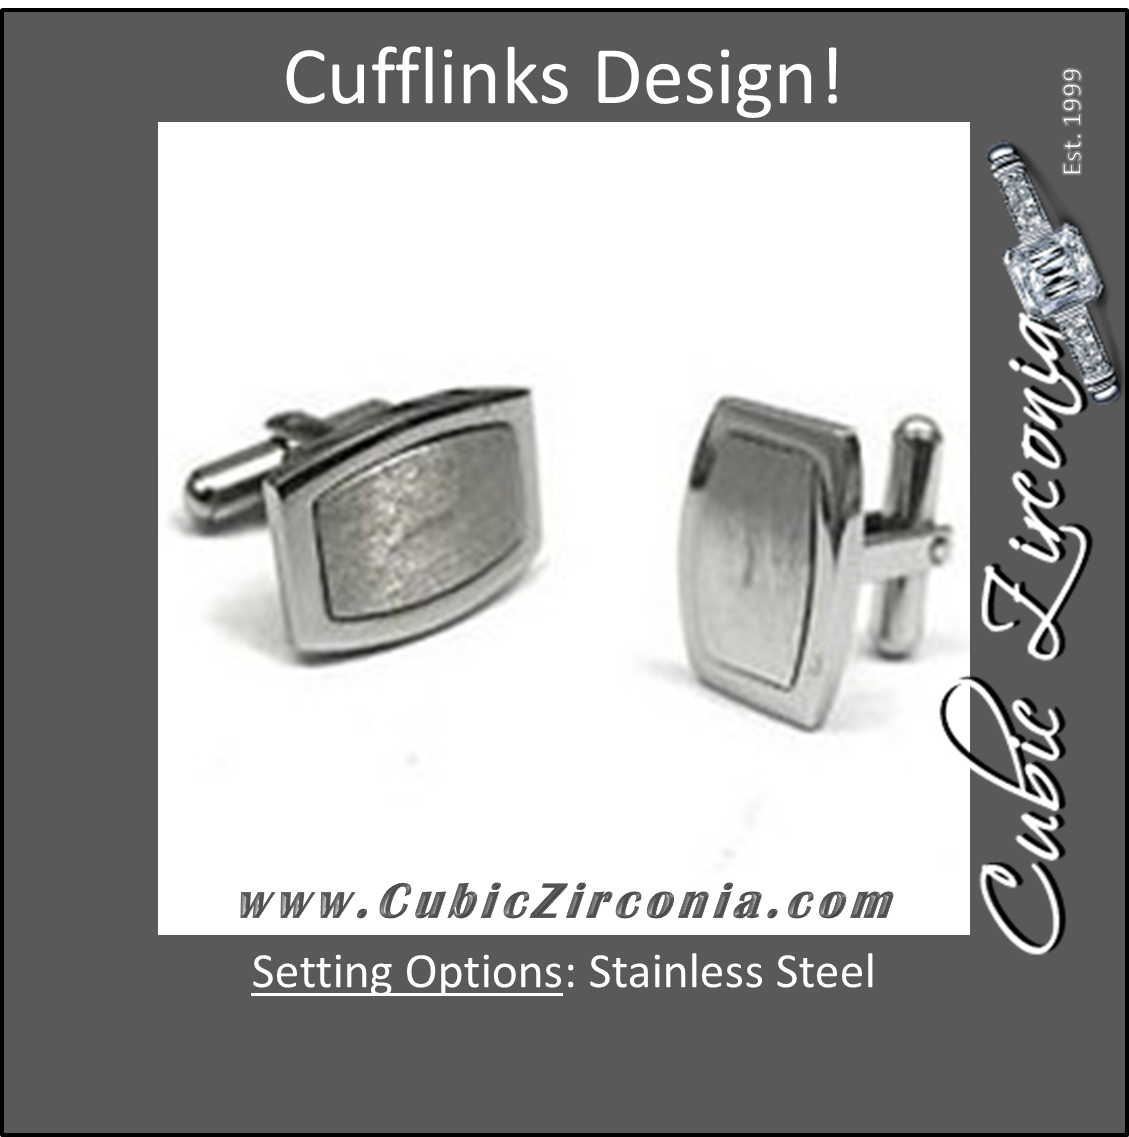 Men’s Cufflinks- Brushed Metal Stainless Steel with Raised Center